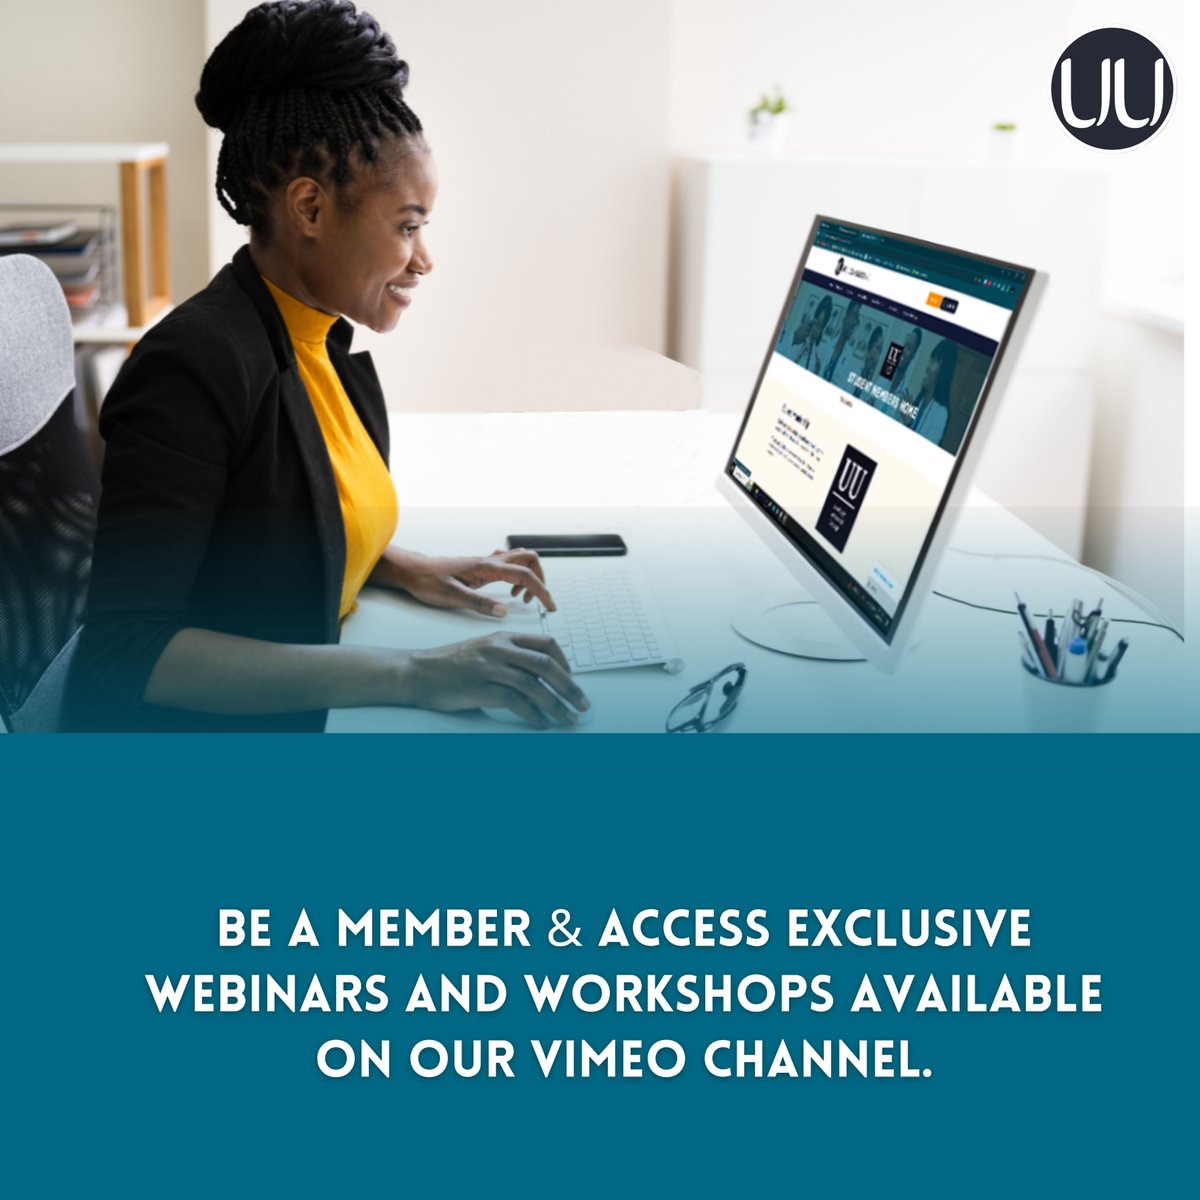 Learn essential skills to conquer #uroresidency challenges with our exclusive Vimeo webinars! Join as a resident member to connect with presenters, foster relationships, and explore opportunities. Interested? Sign up here! bit.ly/UU_SignUp @Uro_Res @UroResidency